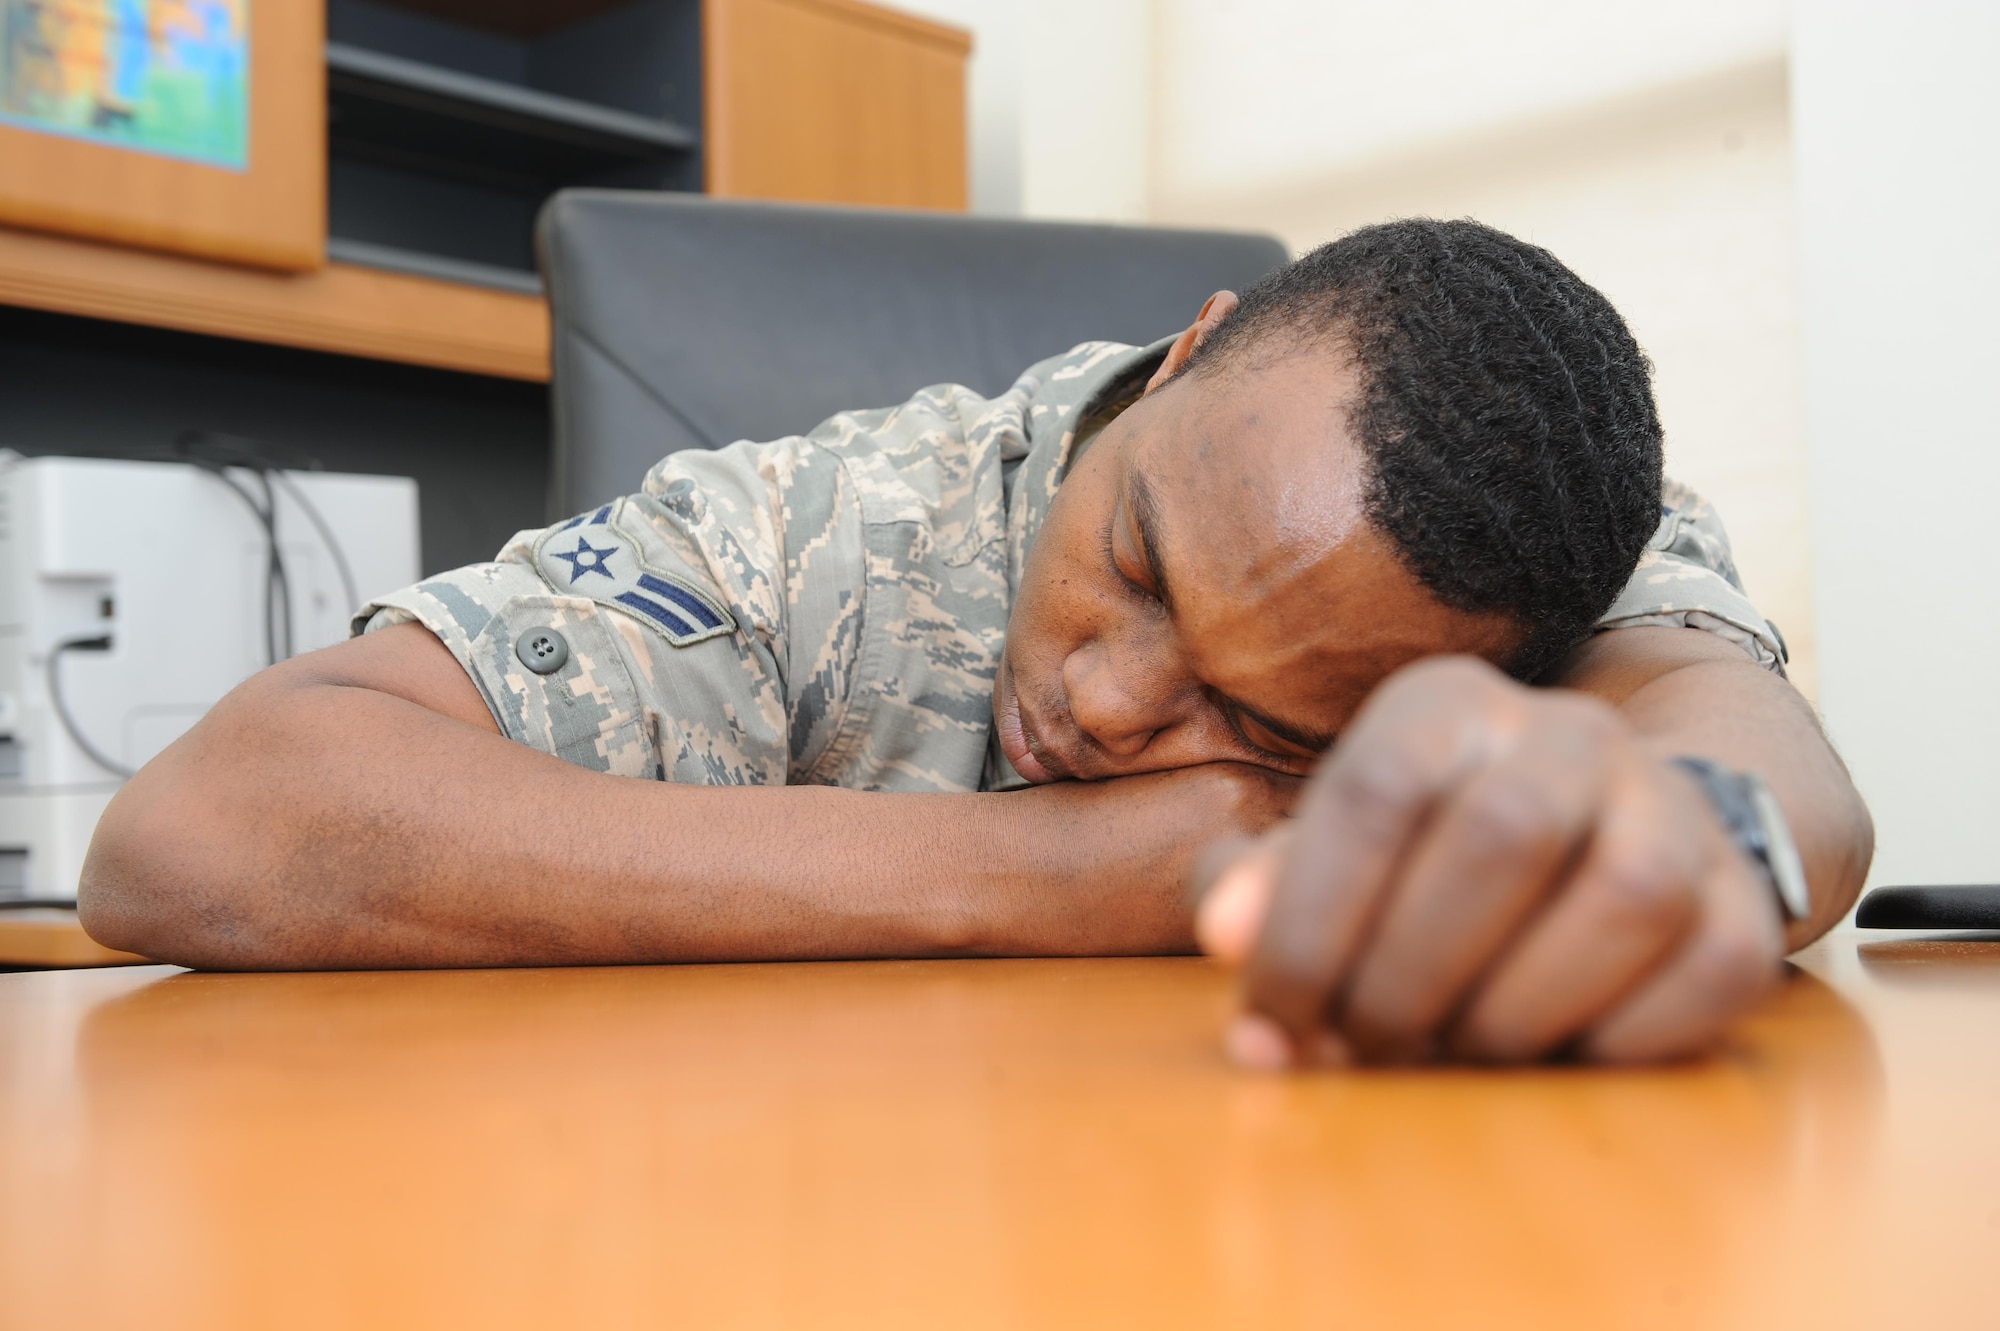 According to the Air Force, many mishaps have cited fatigue as a contributing factor. Getting a better night’s sleep is not only important to be alert during the work day, but also for avoiding health risks. (U.S. Air Force photo/Senior Airman Kristoffer Kaubisch)